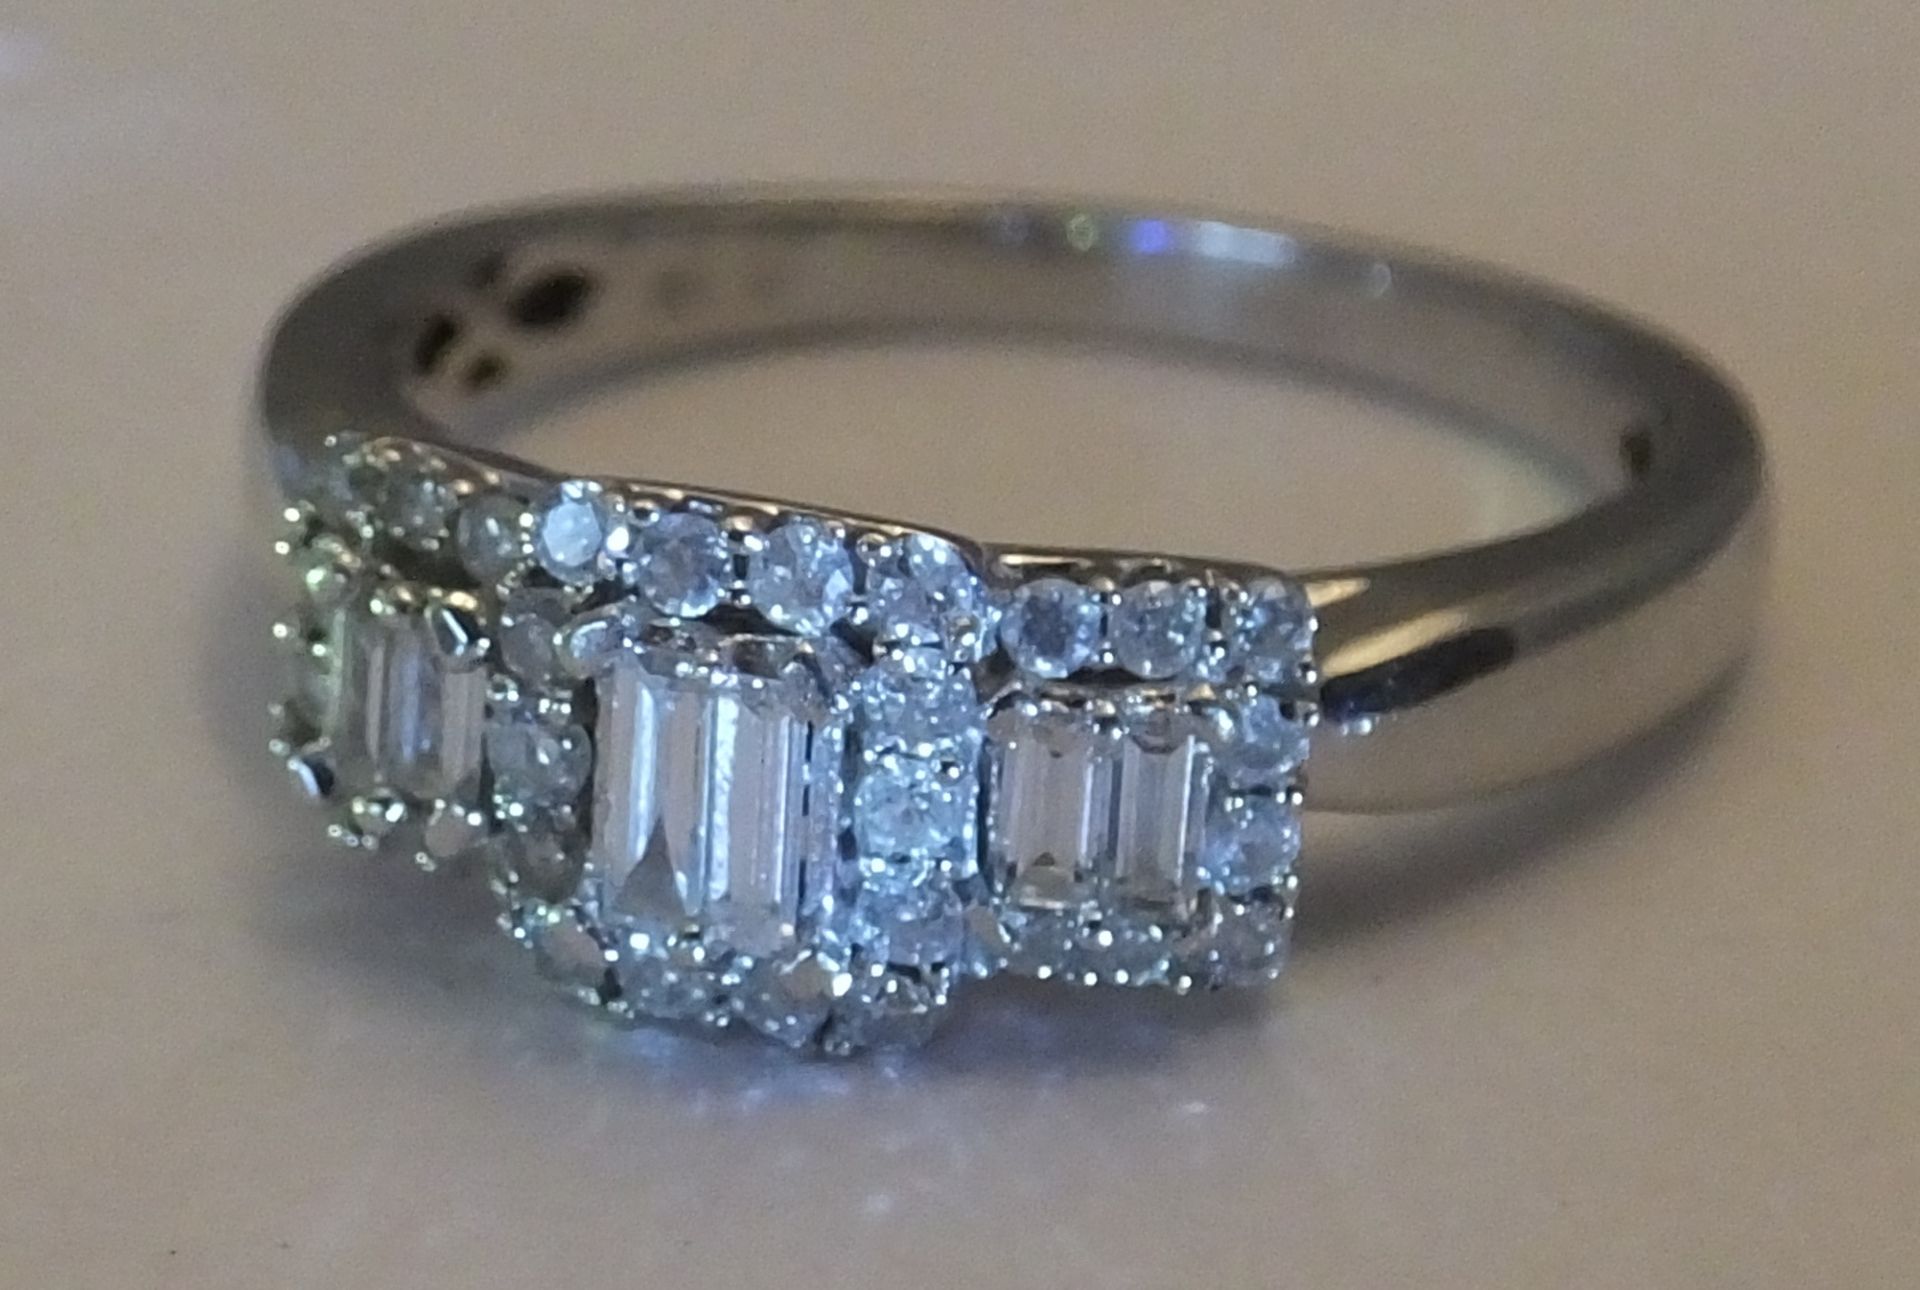 A White gold diamond ring - Size 0. Designed as two baguette-cut diamonds within a brilliant-cut